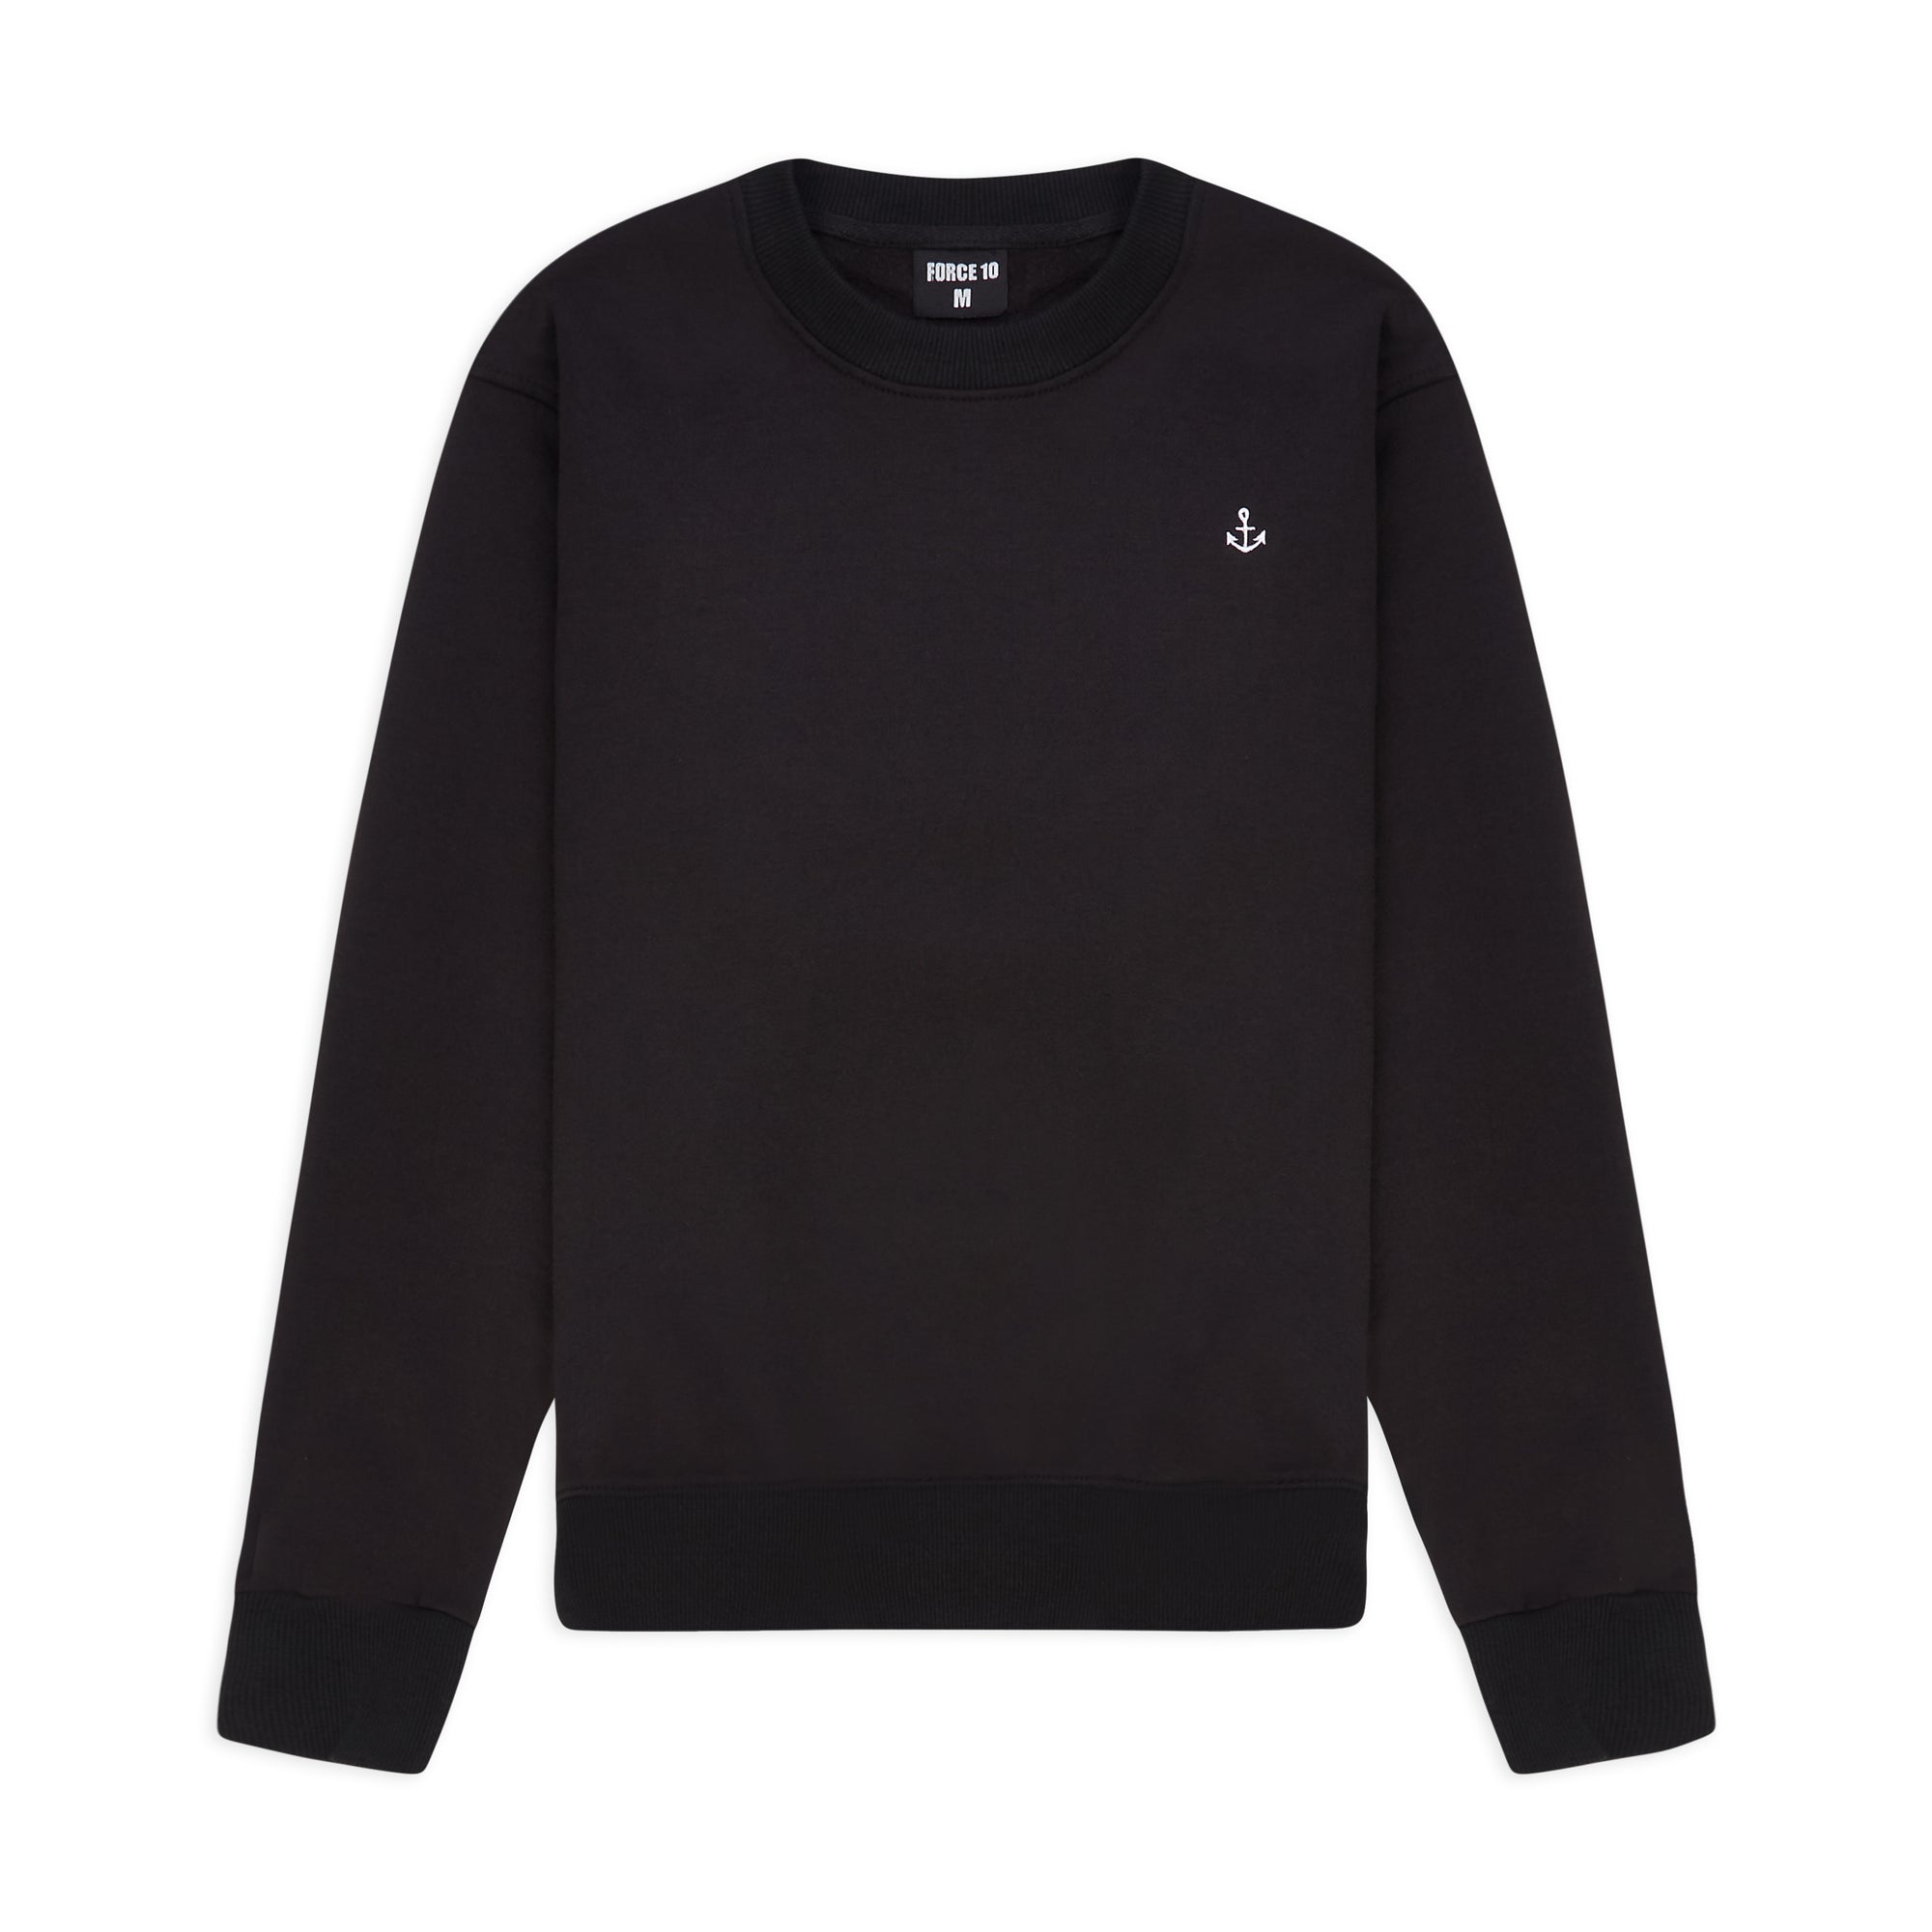 FORCE 10 OFFICIAL ⚓️ HEAVY WEIGHT COUNTRY CLUB JUMPER